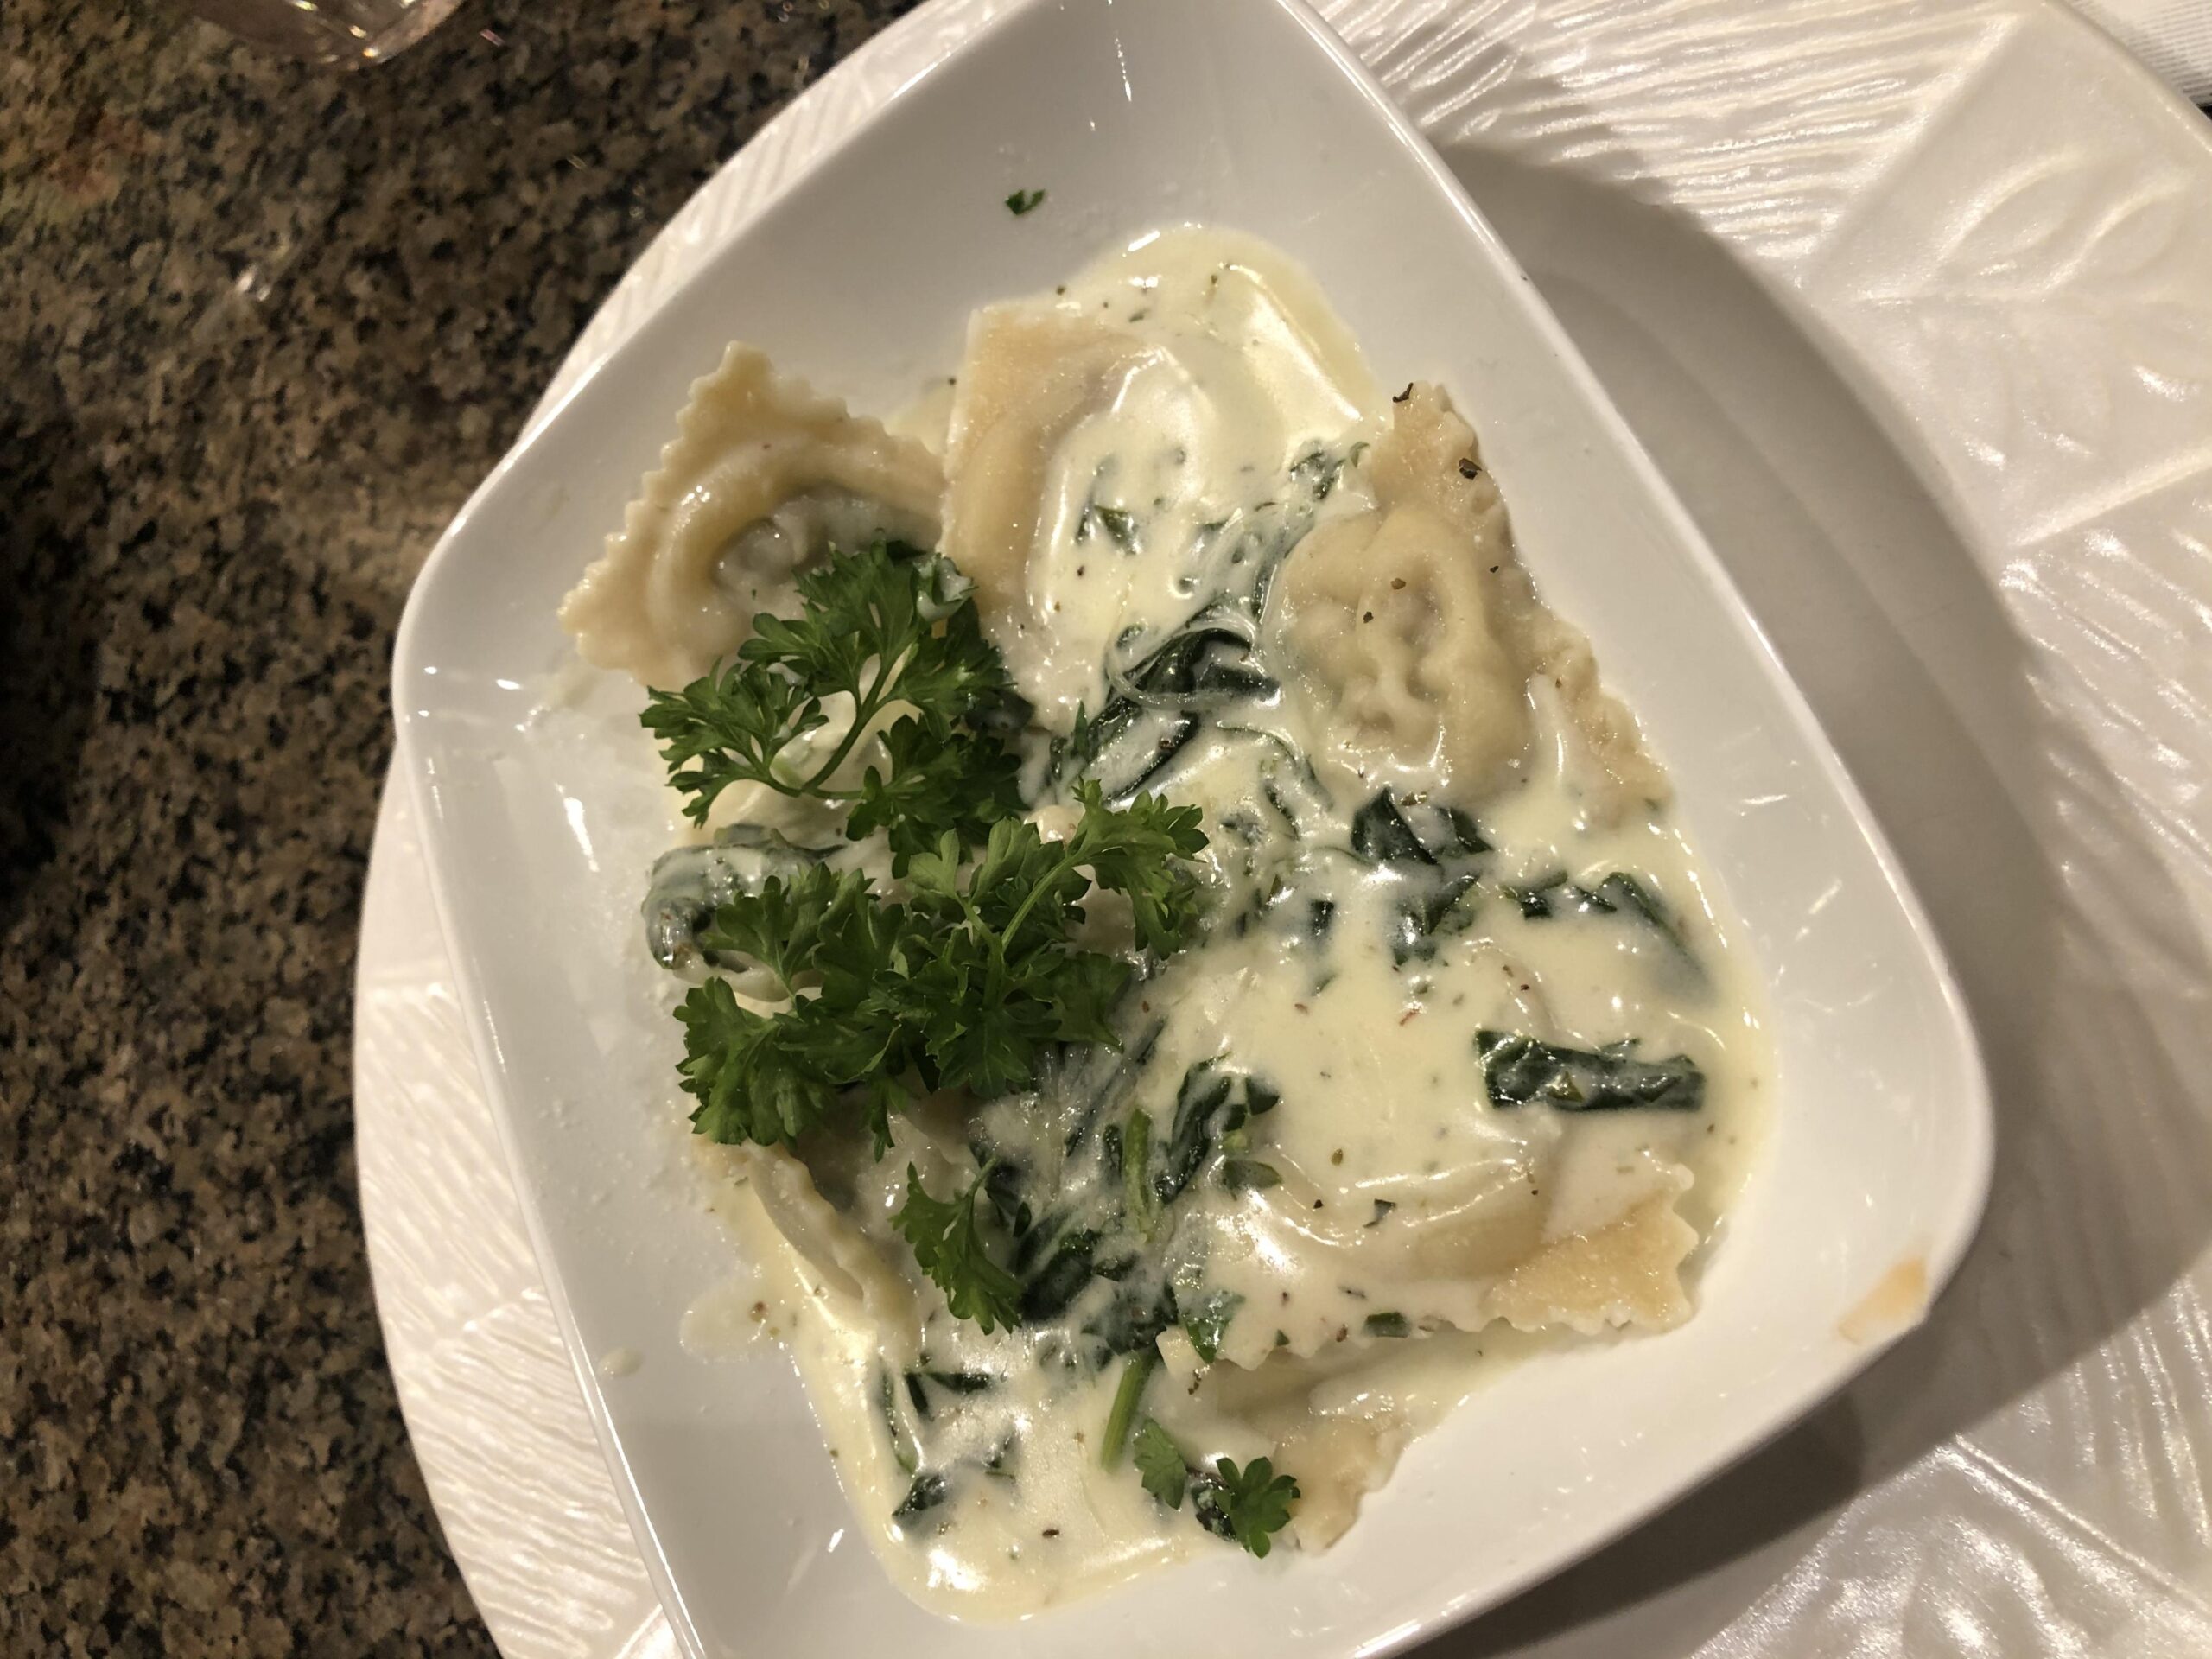  Indulge in a bowl of creamy cheese ravioli, zesty zucchini, and a refreshing white wine sauce.